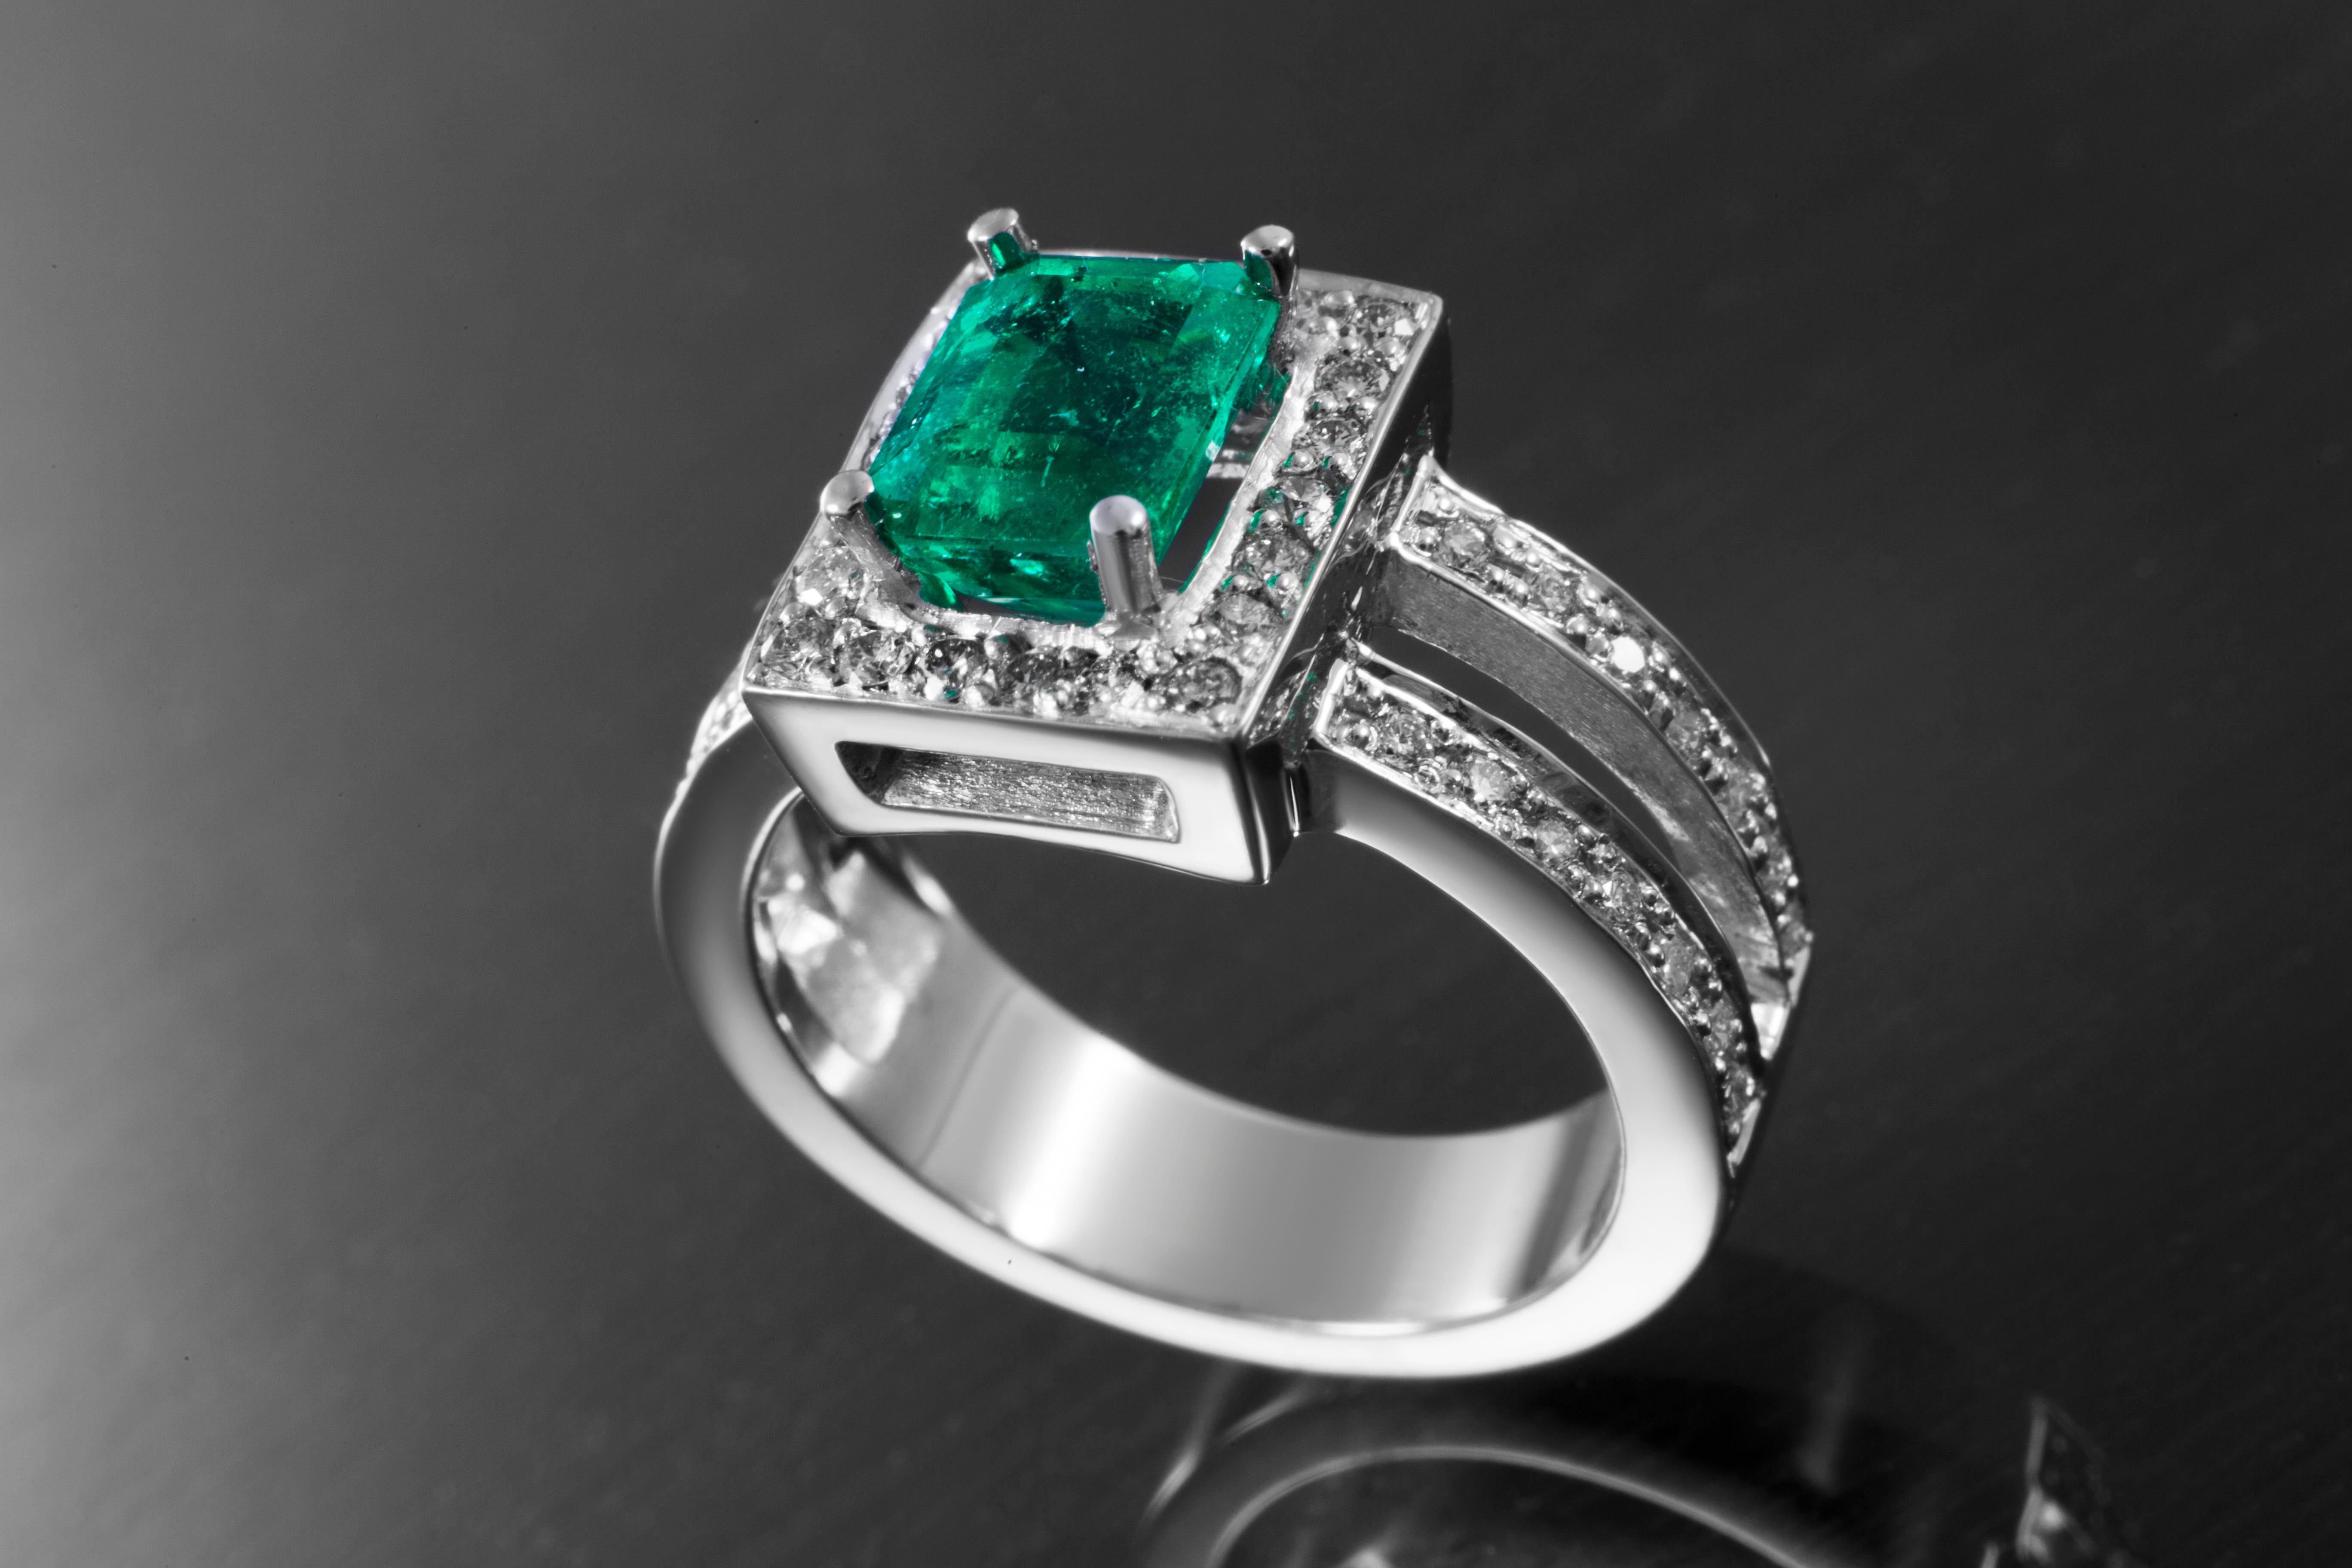 This pieces contains a 1.77 carat certified F1 quality Colombian Muzo emerald centre stone, set in 18 carat white gold with a diamond melee containing 50 stones of brilliant cut, 0.5 carats total, H-I colour.  

Certified by CDTEC gemological